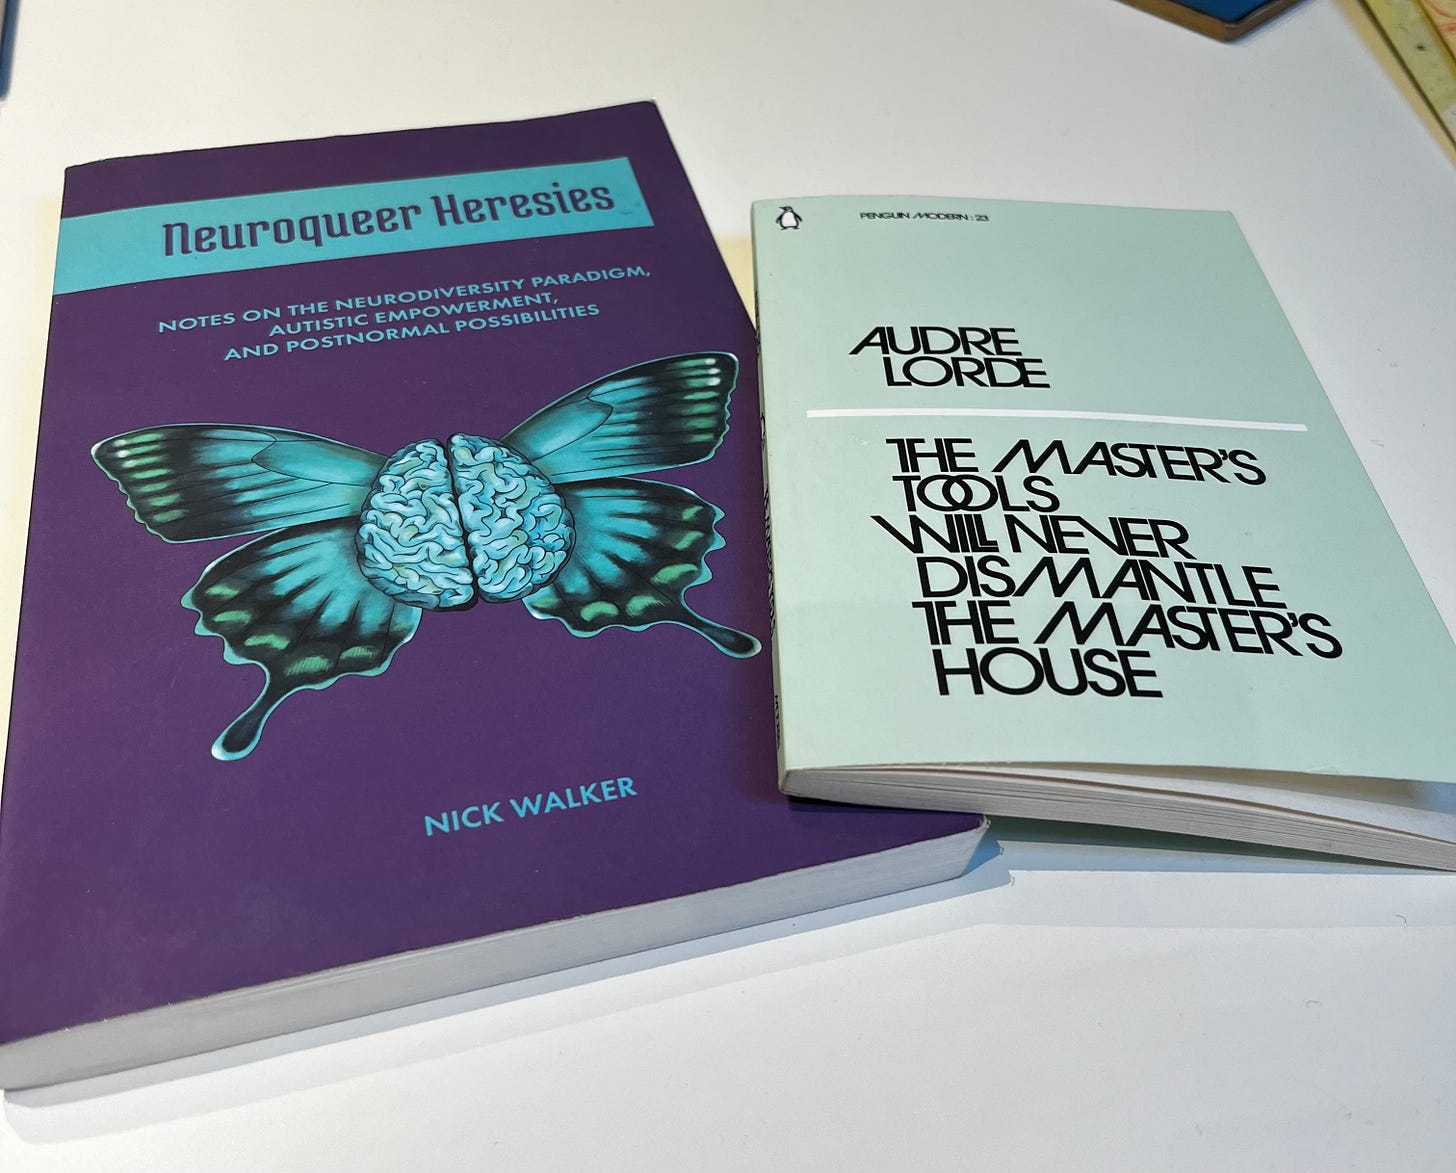 Copies of the Books 'Neuroqueer Heresies' by Nick walker and 'The Master's Tolls will Never Dismantle the Master's House' by Audre Lorde on a white table